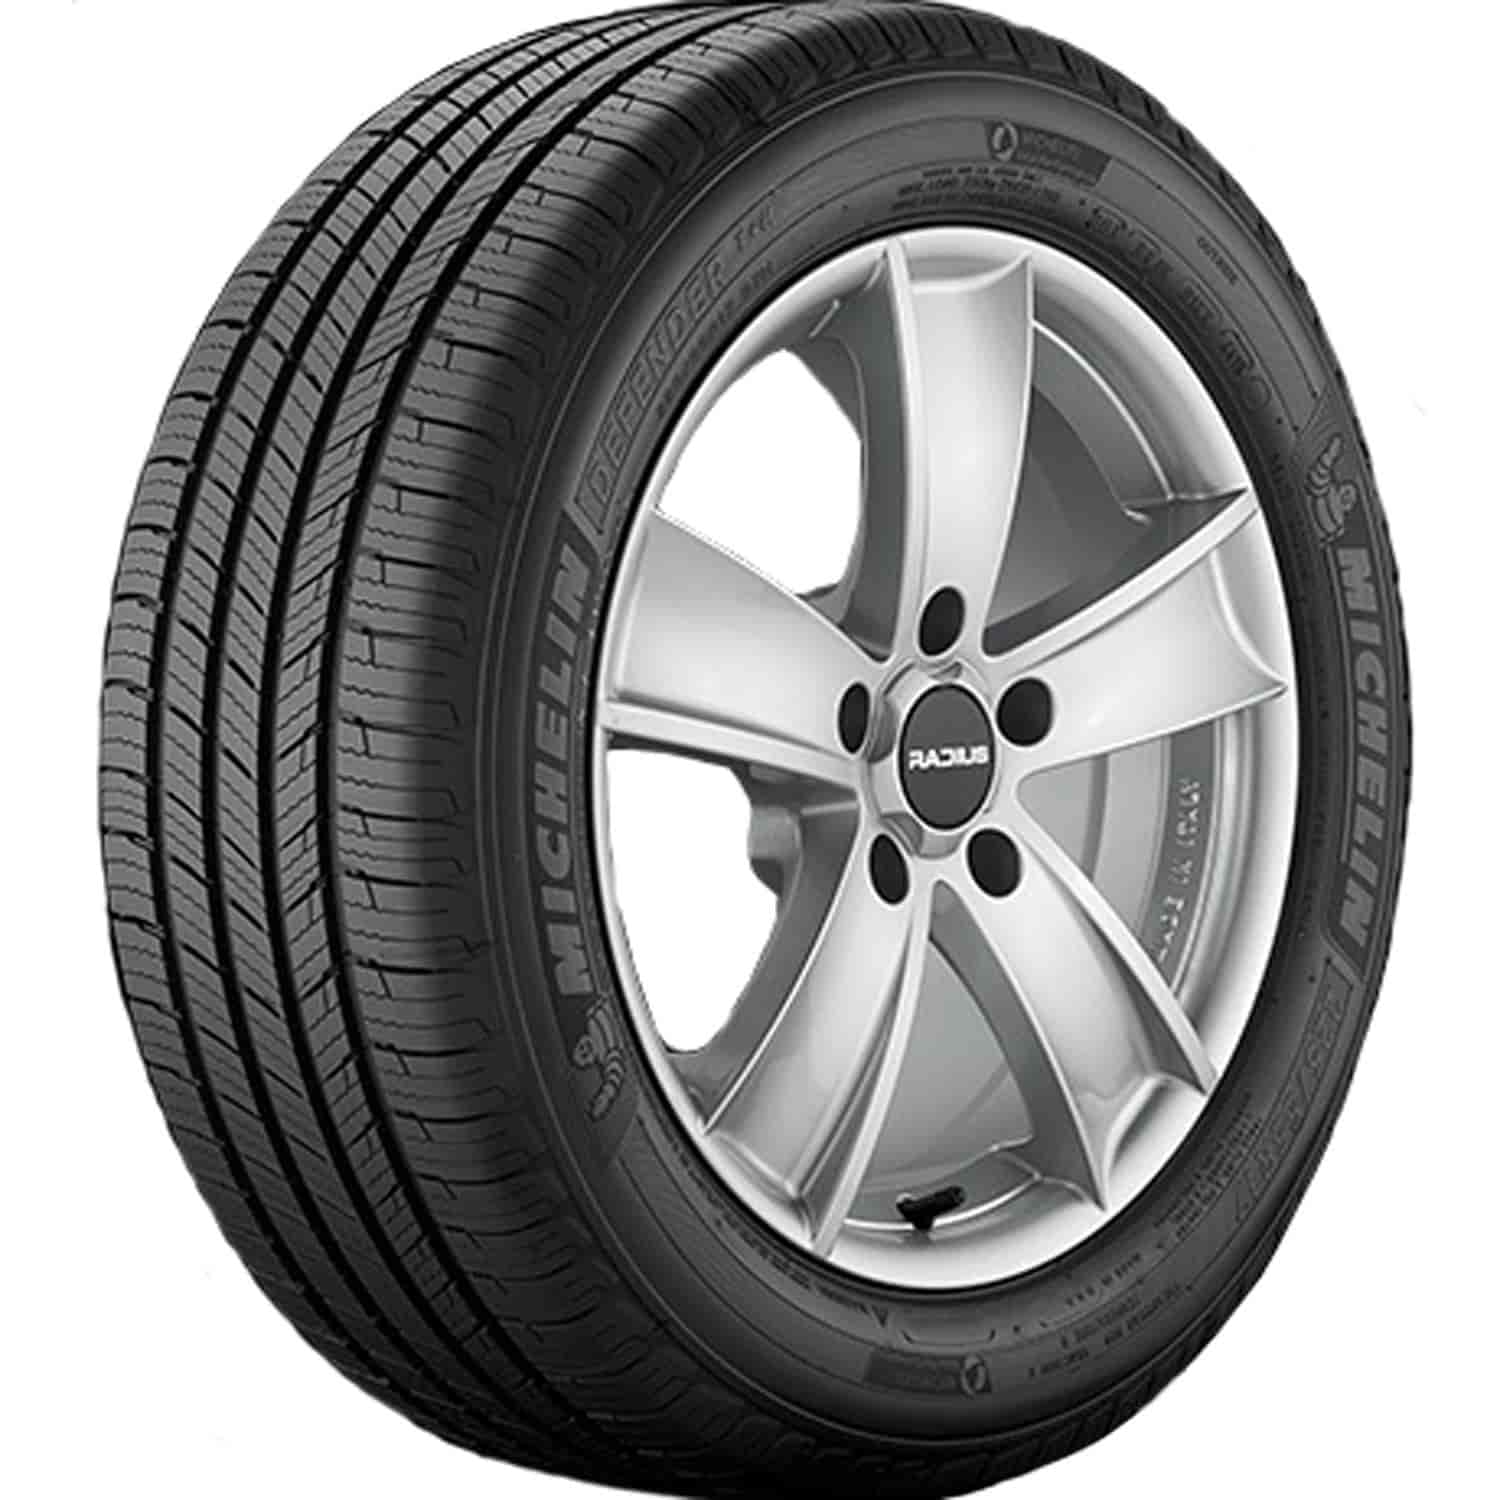 Defender T+H Tire Size:205/65R15